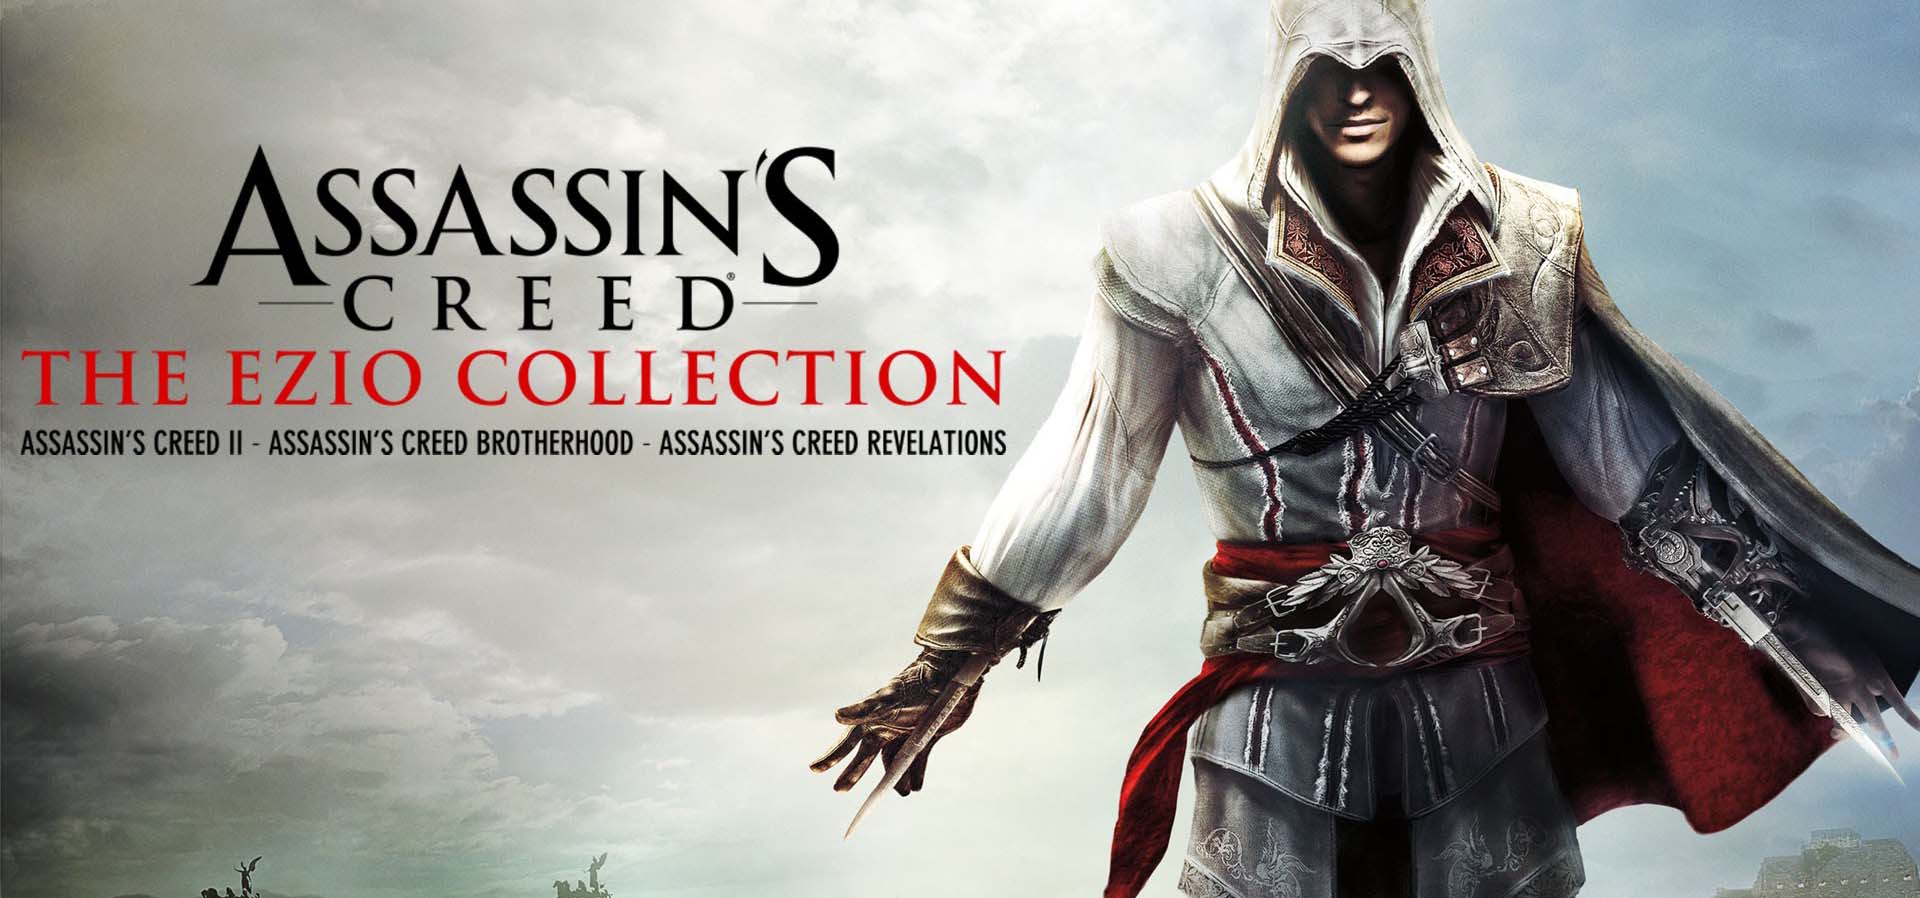 Assassin's Creed: The Ezio Collection rumoured for Nintendo Switch - My  Nintendo News